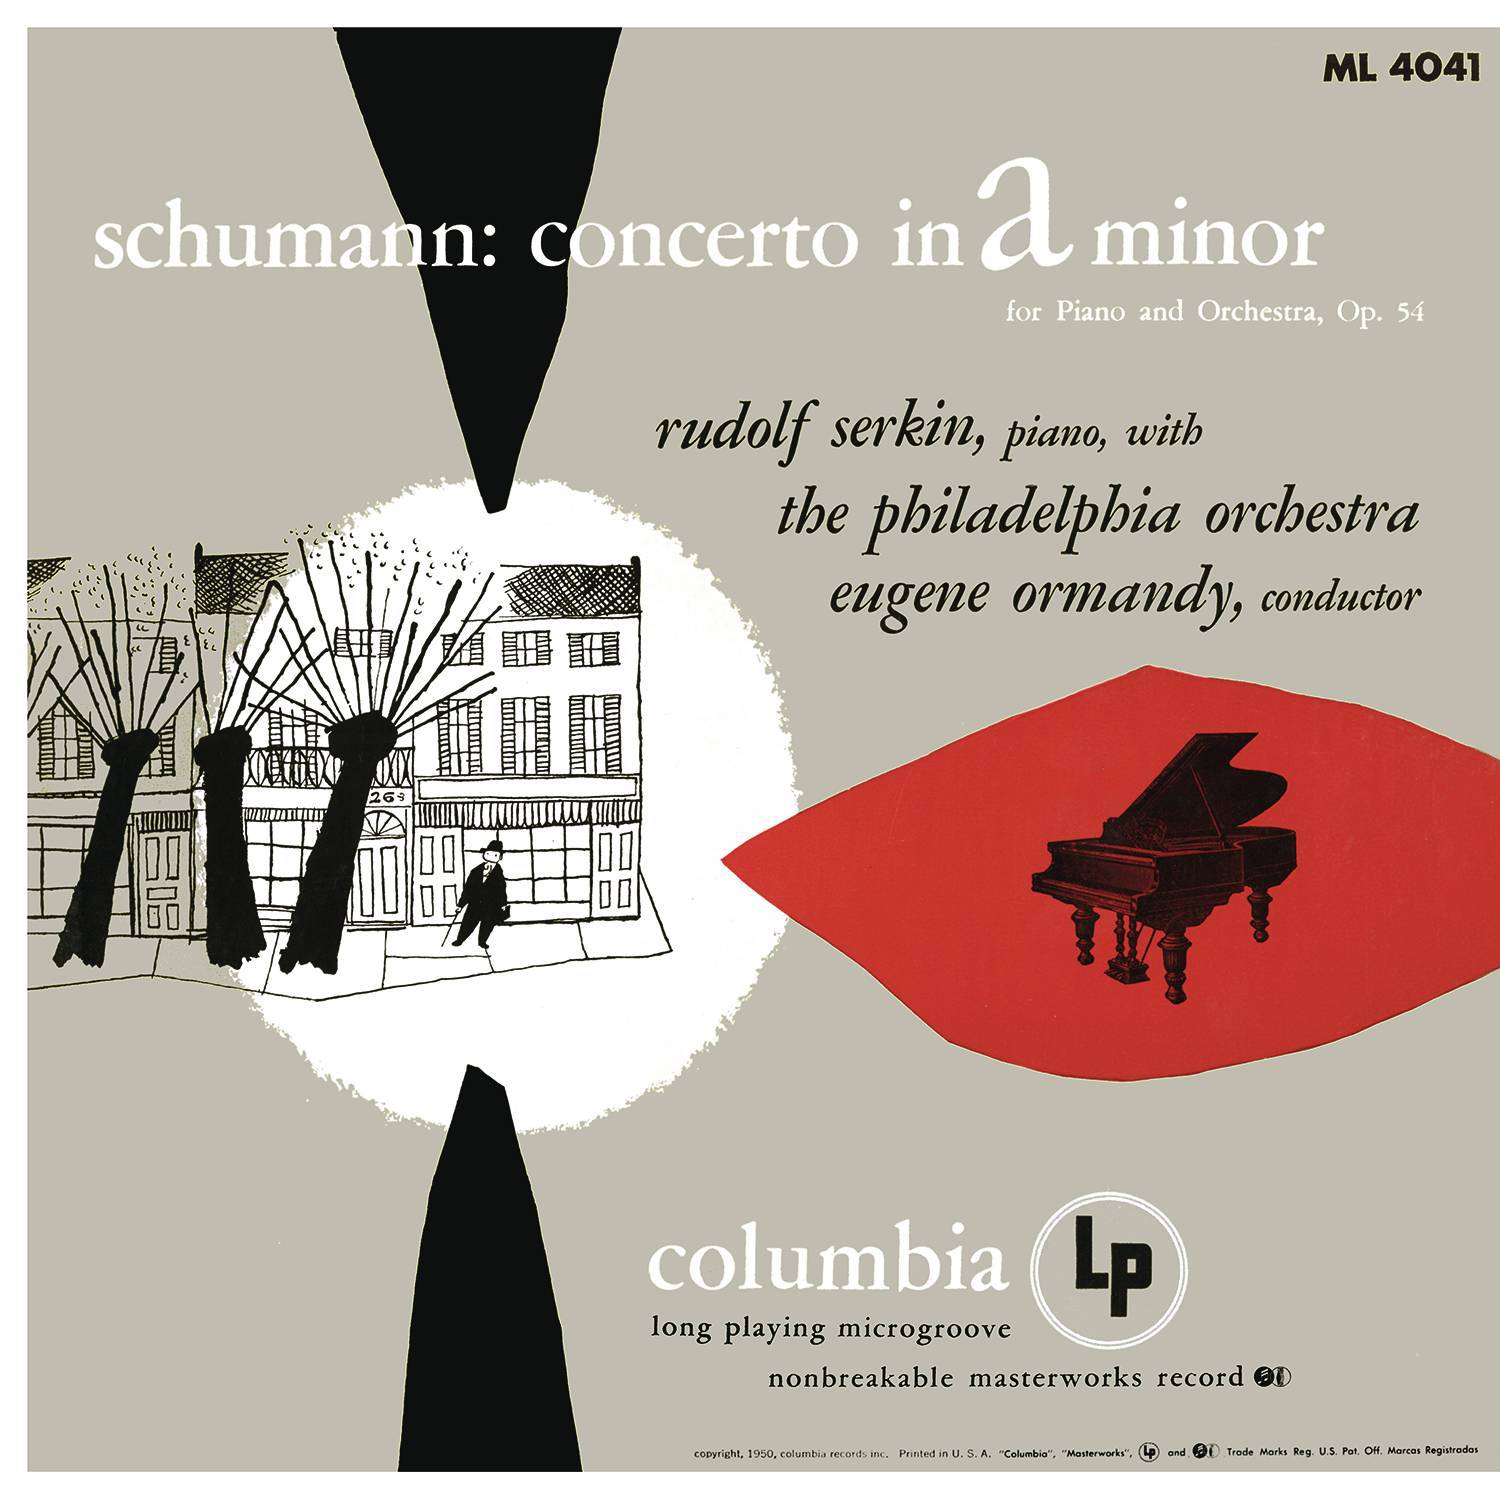 Schumann: Concerto for Piano and Orchestra in A Minor, Op. 54专辑